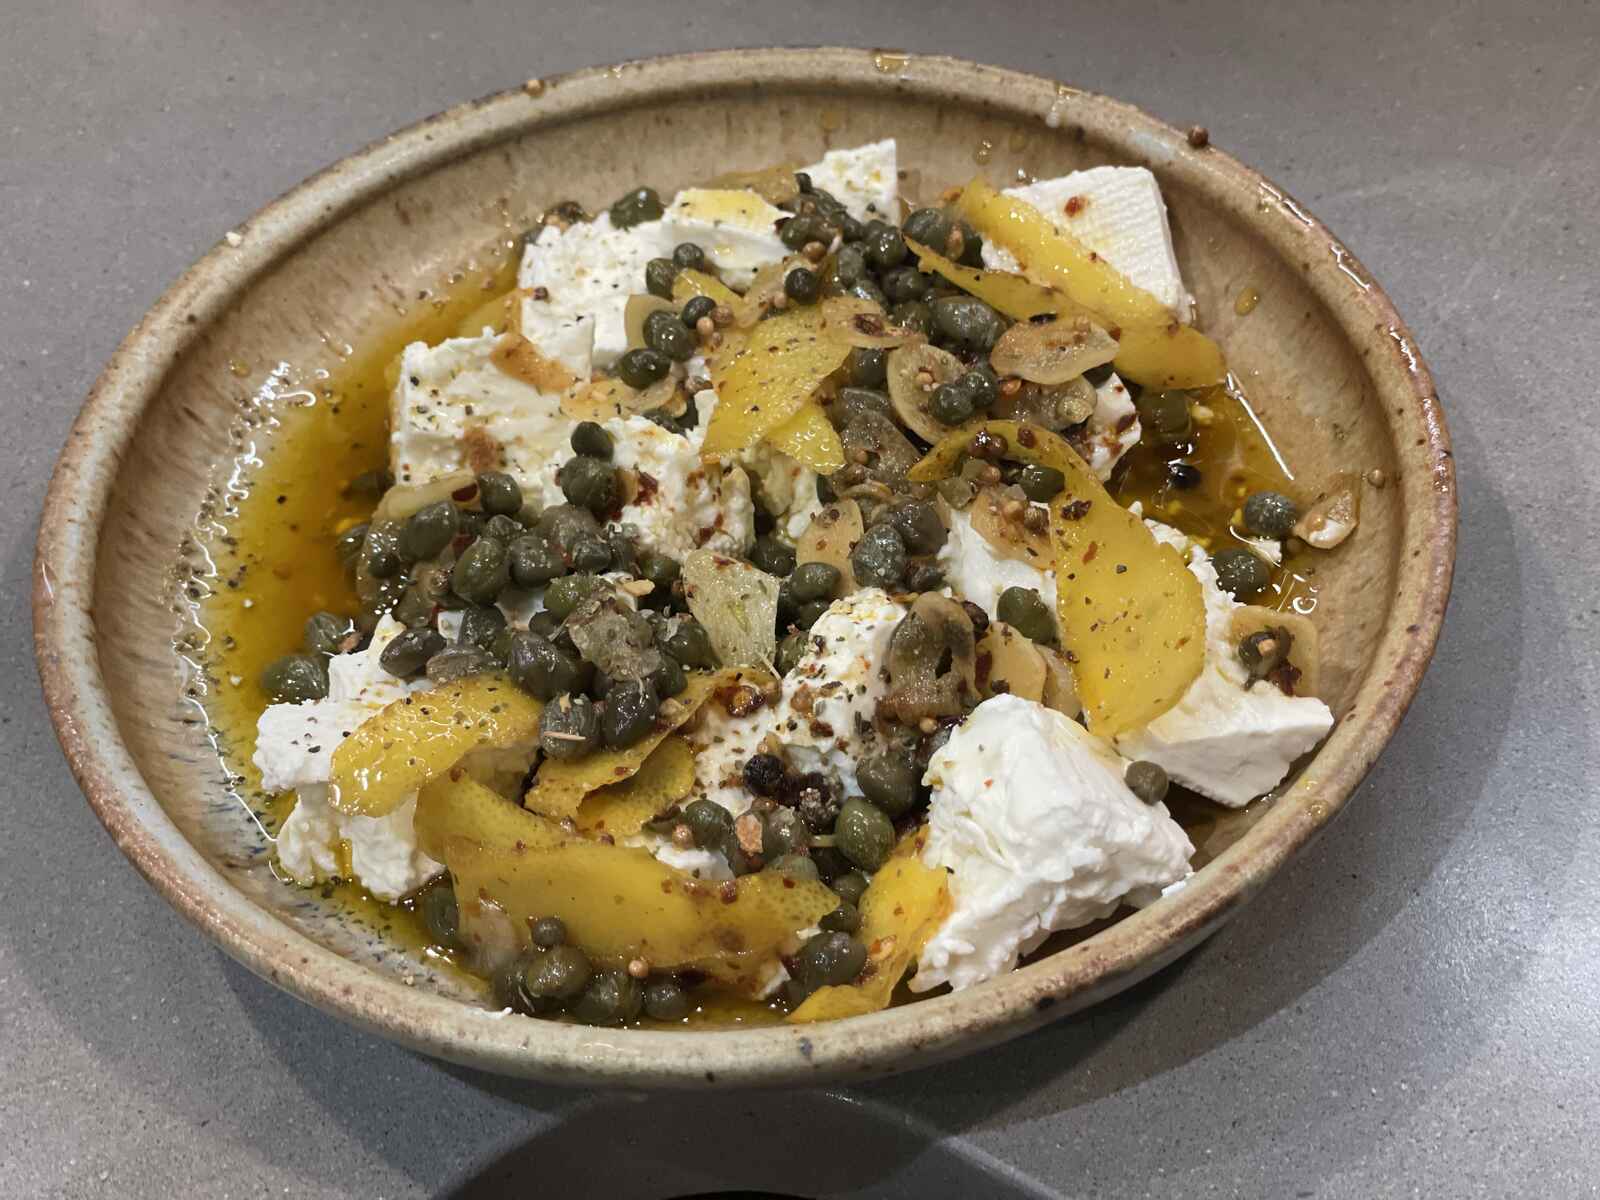 A shallow bowl containing feta cheese with lemon peel, capers, garlic, cumin, coriander, red chili flake and olive oil on top